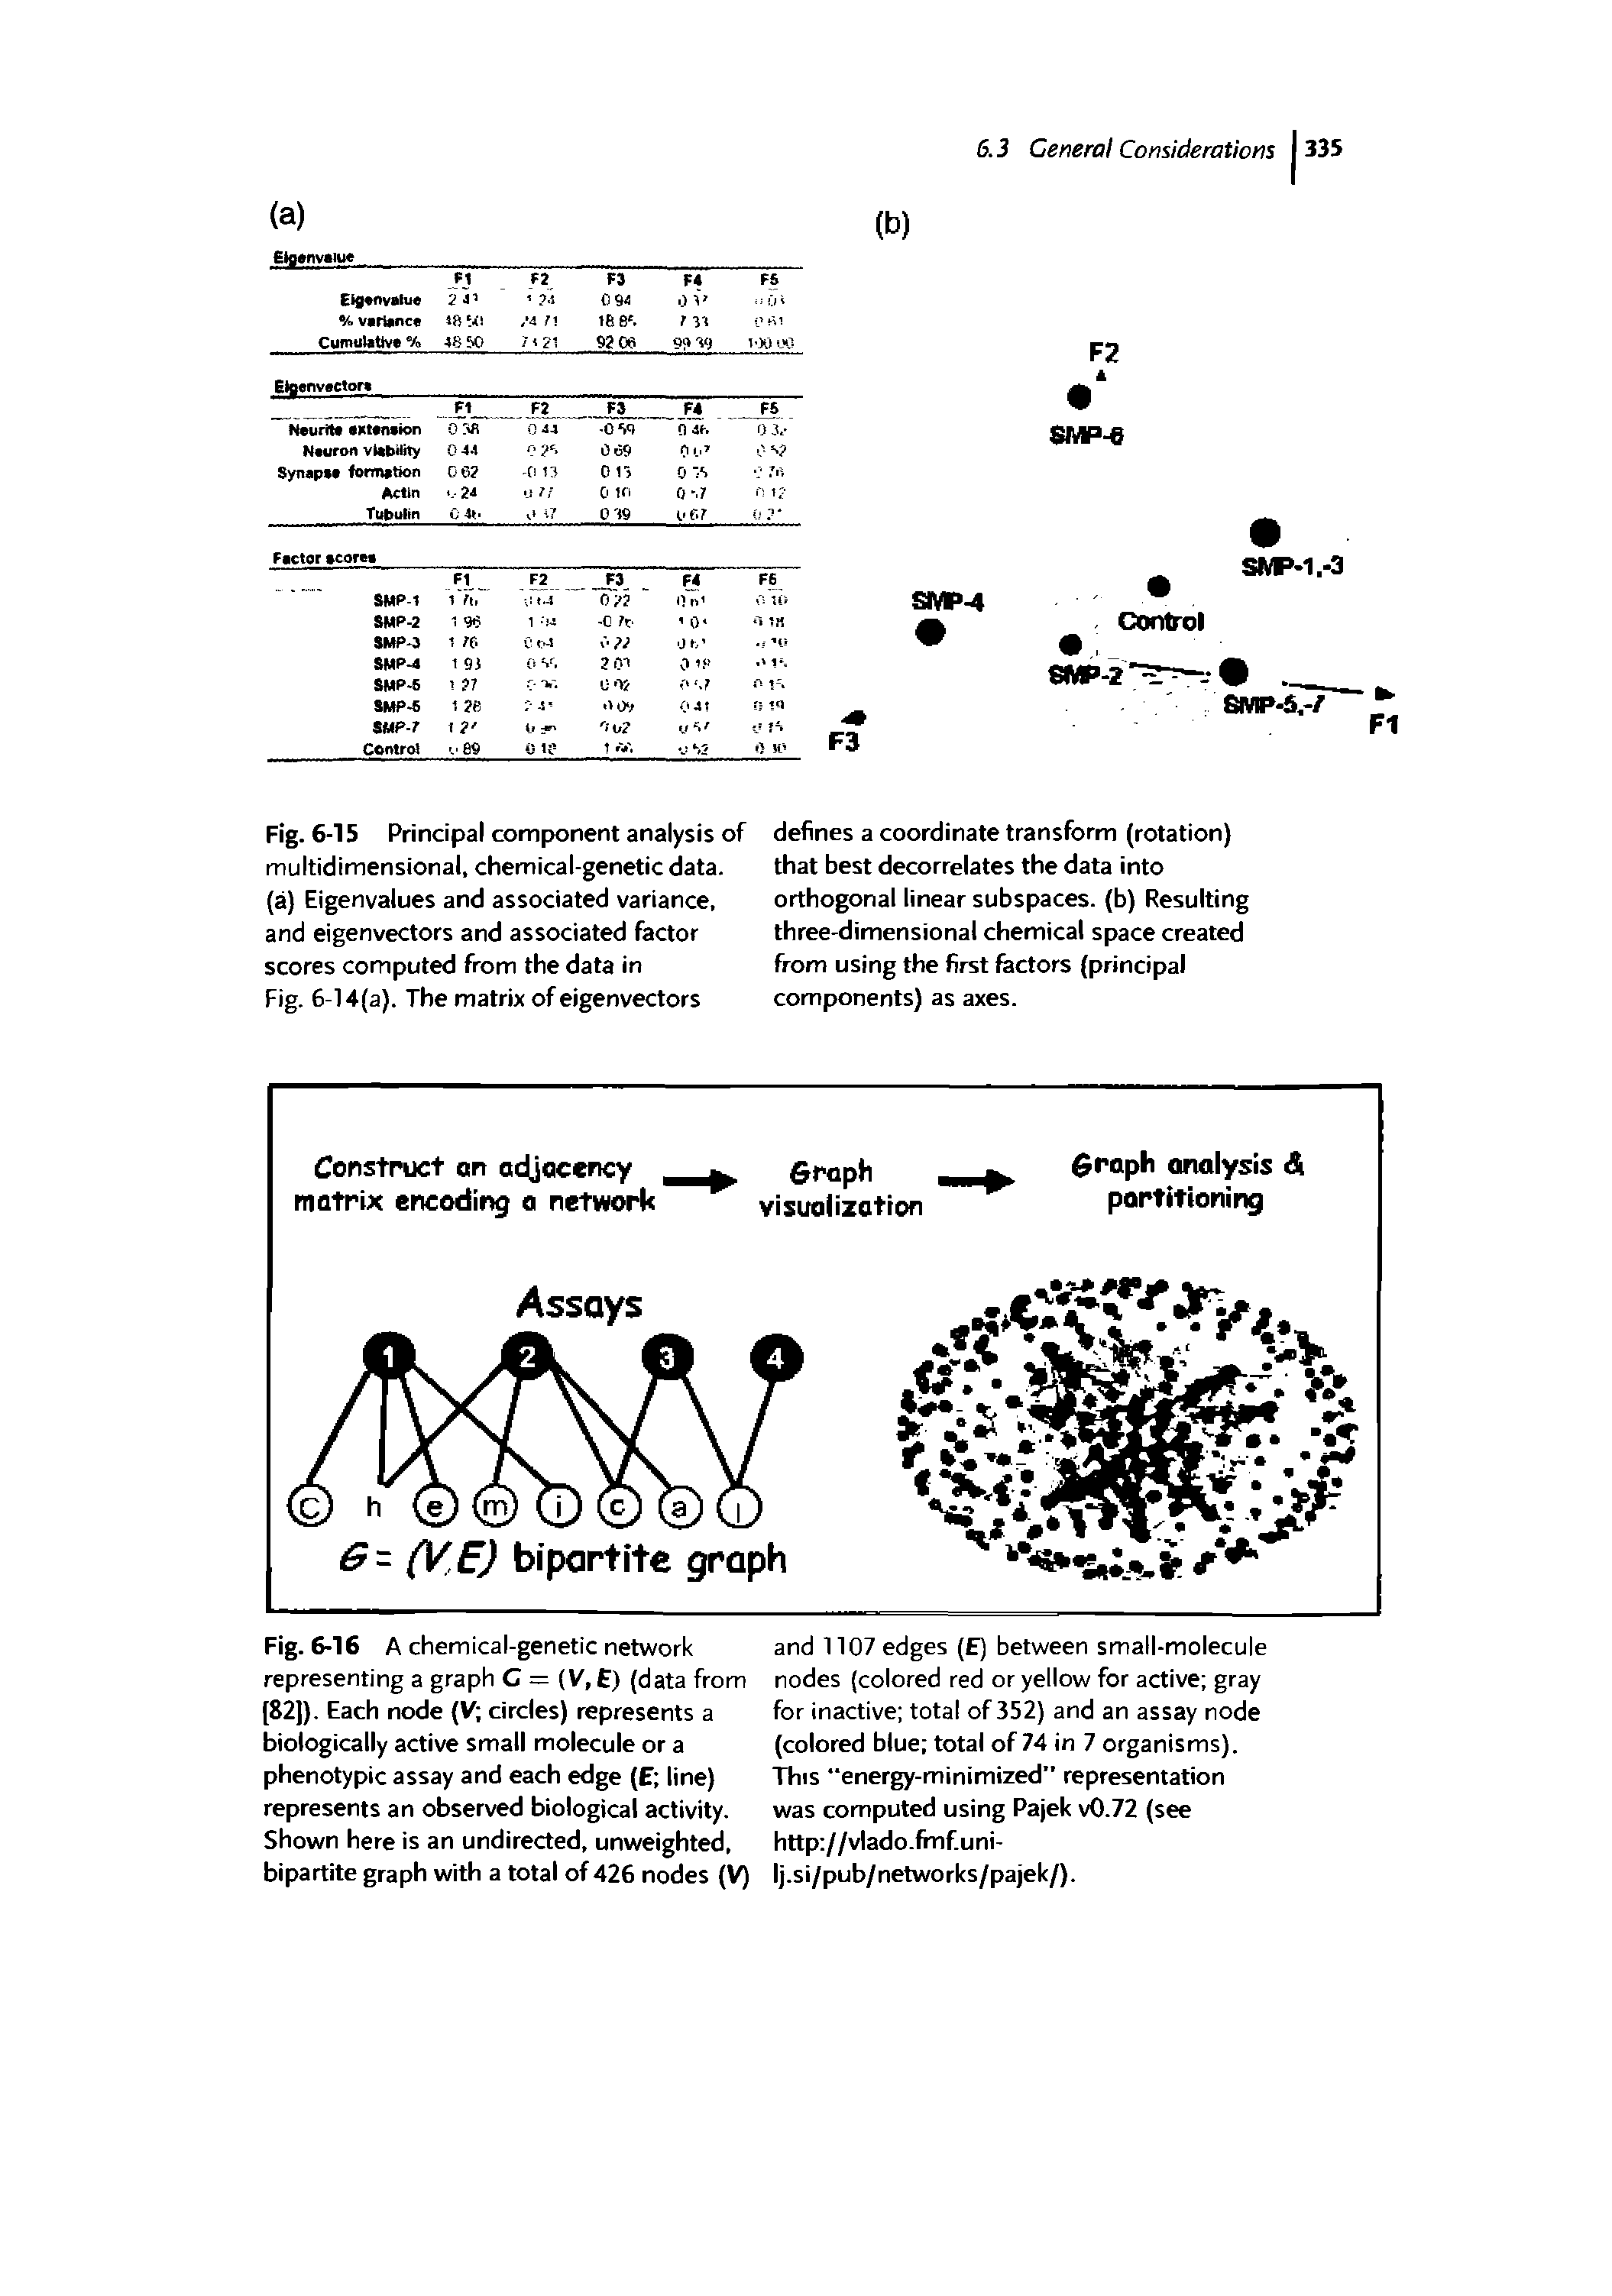 Fig. 6-15 Principal component analysis of multidimensional, chemical-genetic data, (a) Eigenvalues and associated variance, and eigenvectors and associated factor scores computed from the data in Fig. 6-14(a). The matrix of eigenvectors...